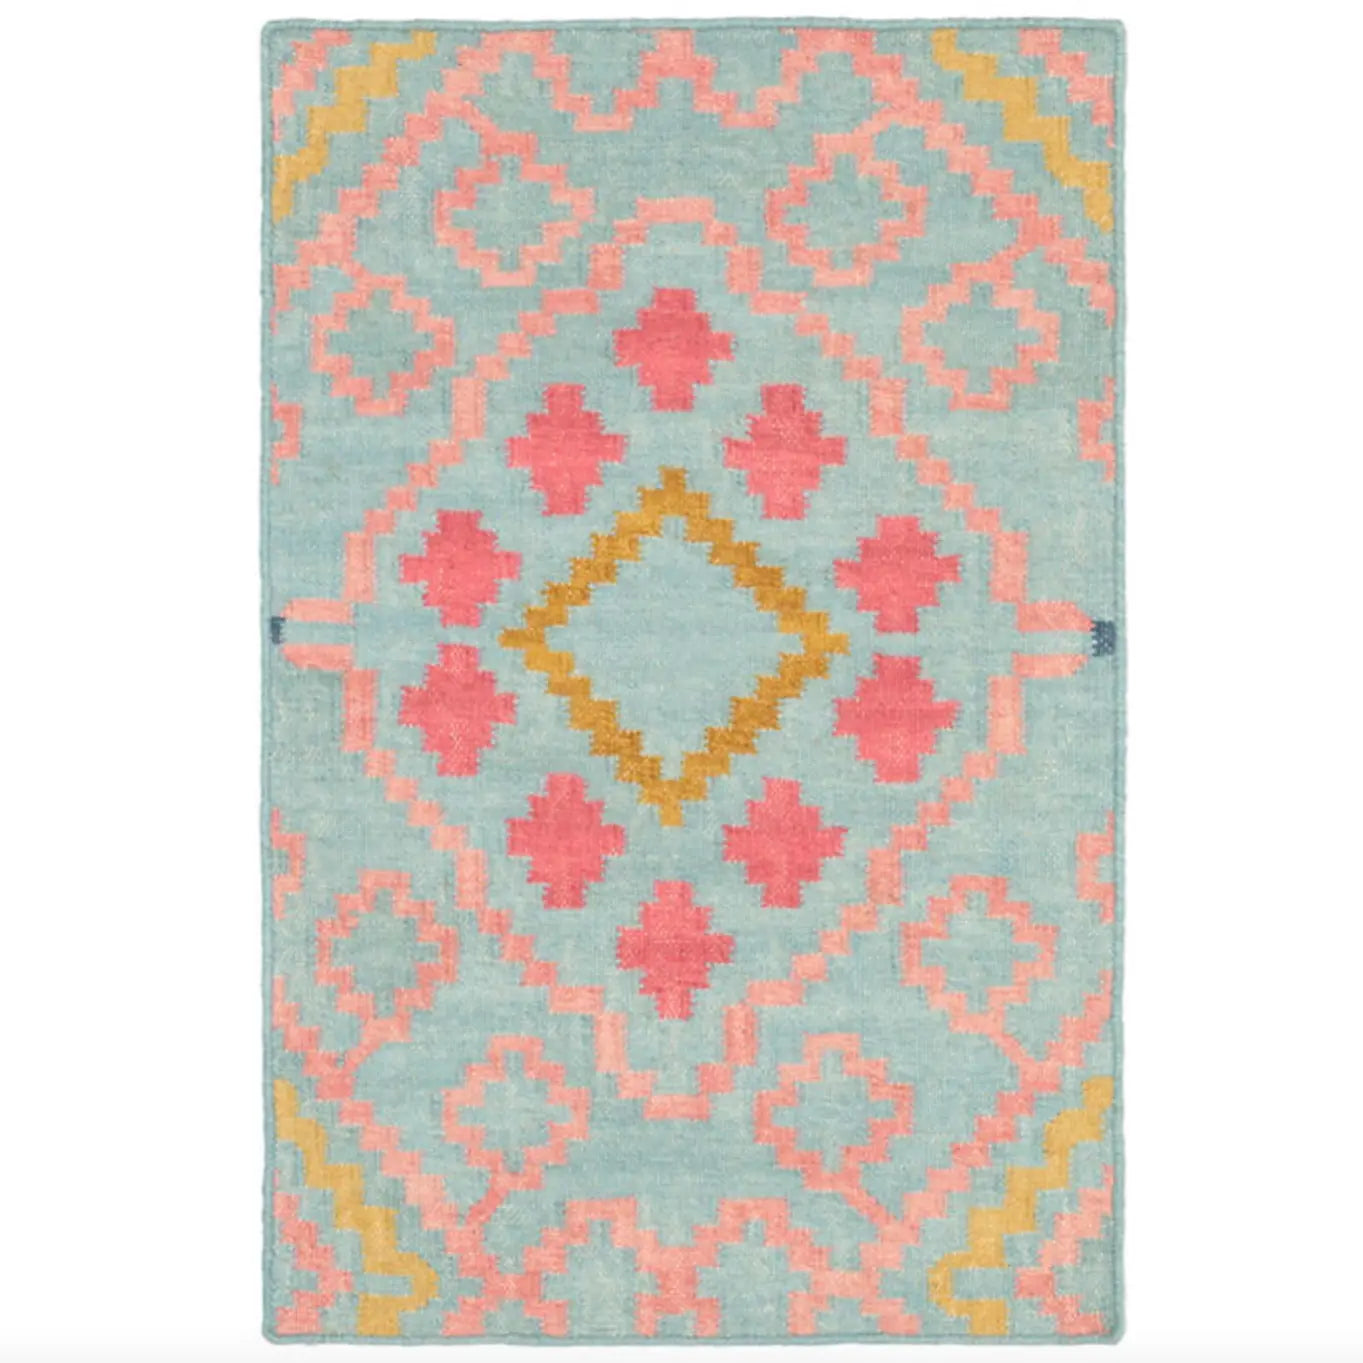 Jelly Roll Multi Woven Wool Rug - Home Smith